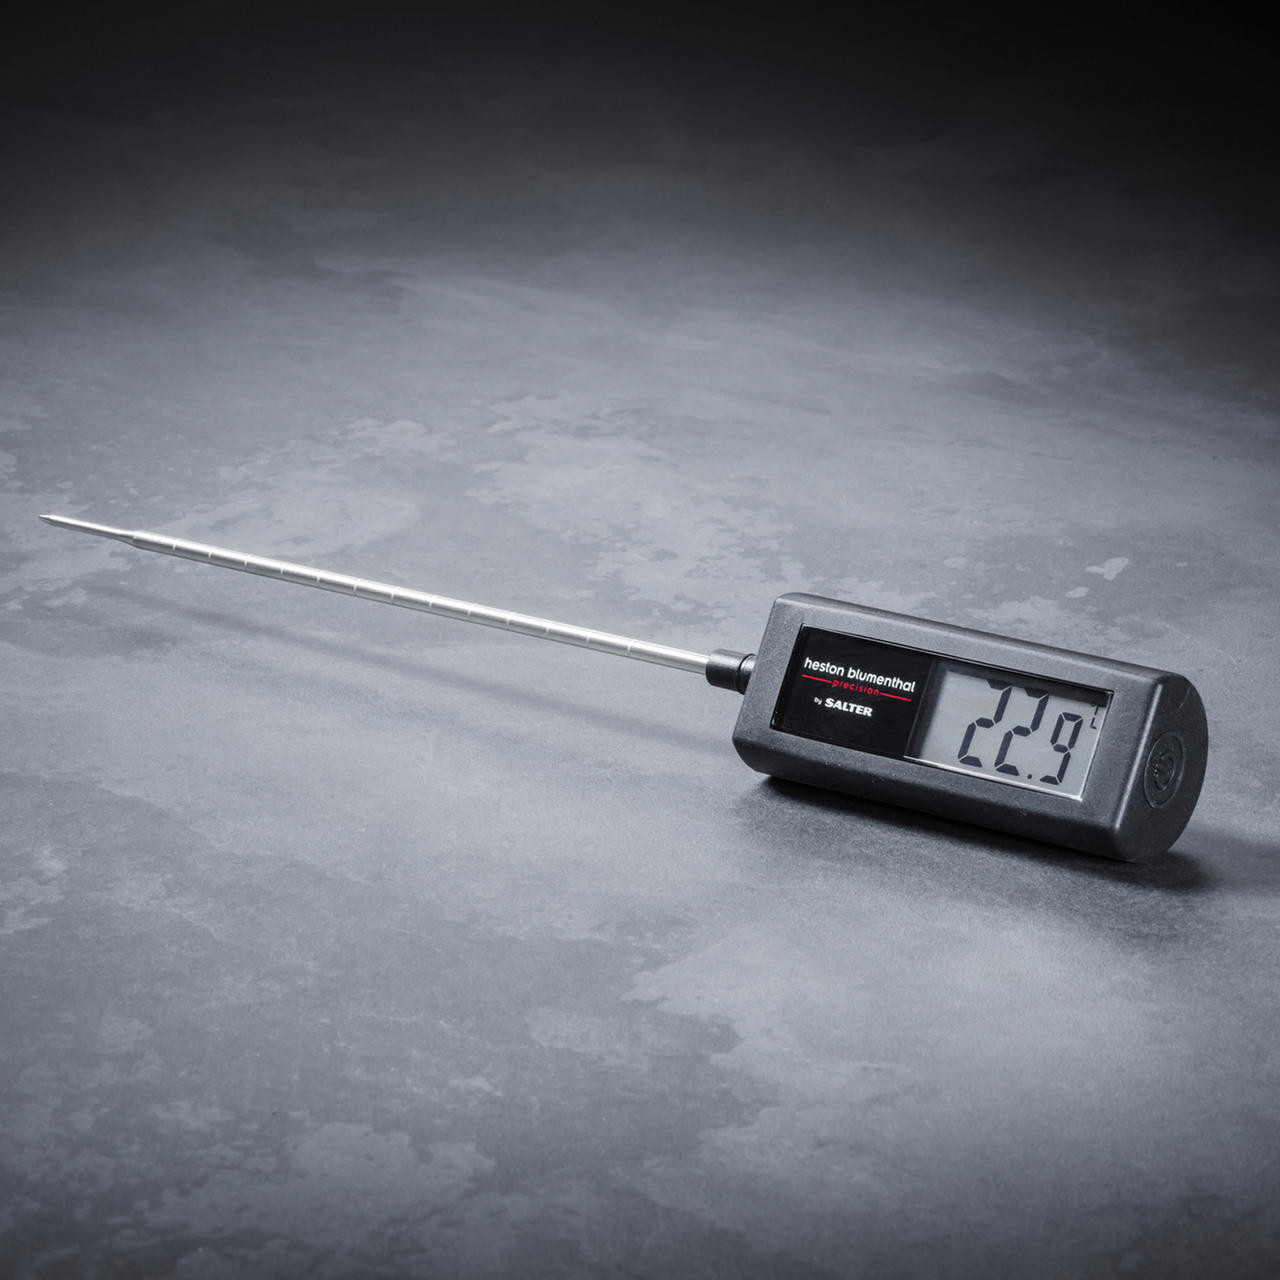 5-in-1 Digital Food Thermometer: Heston Blumenthal Precision